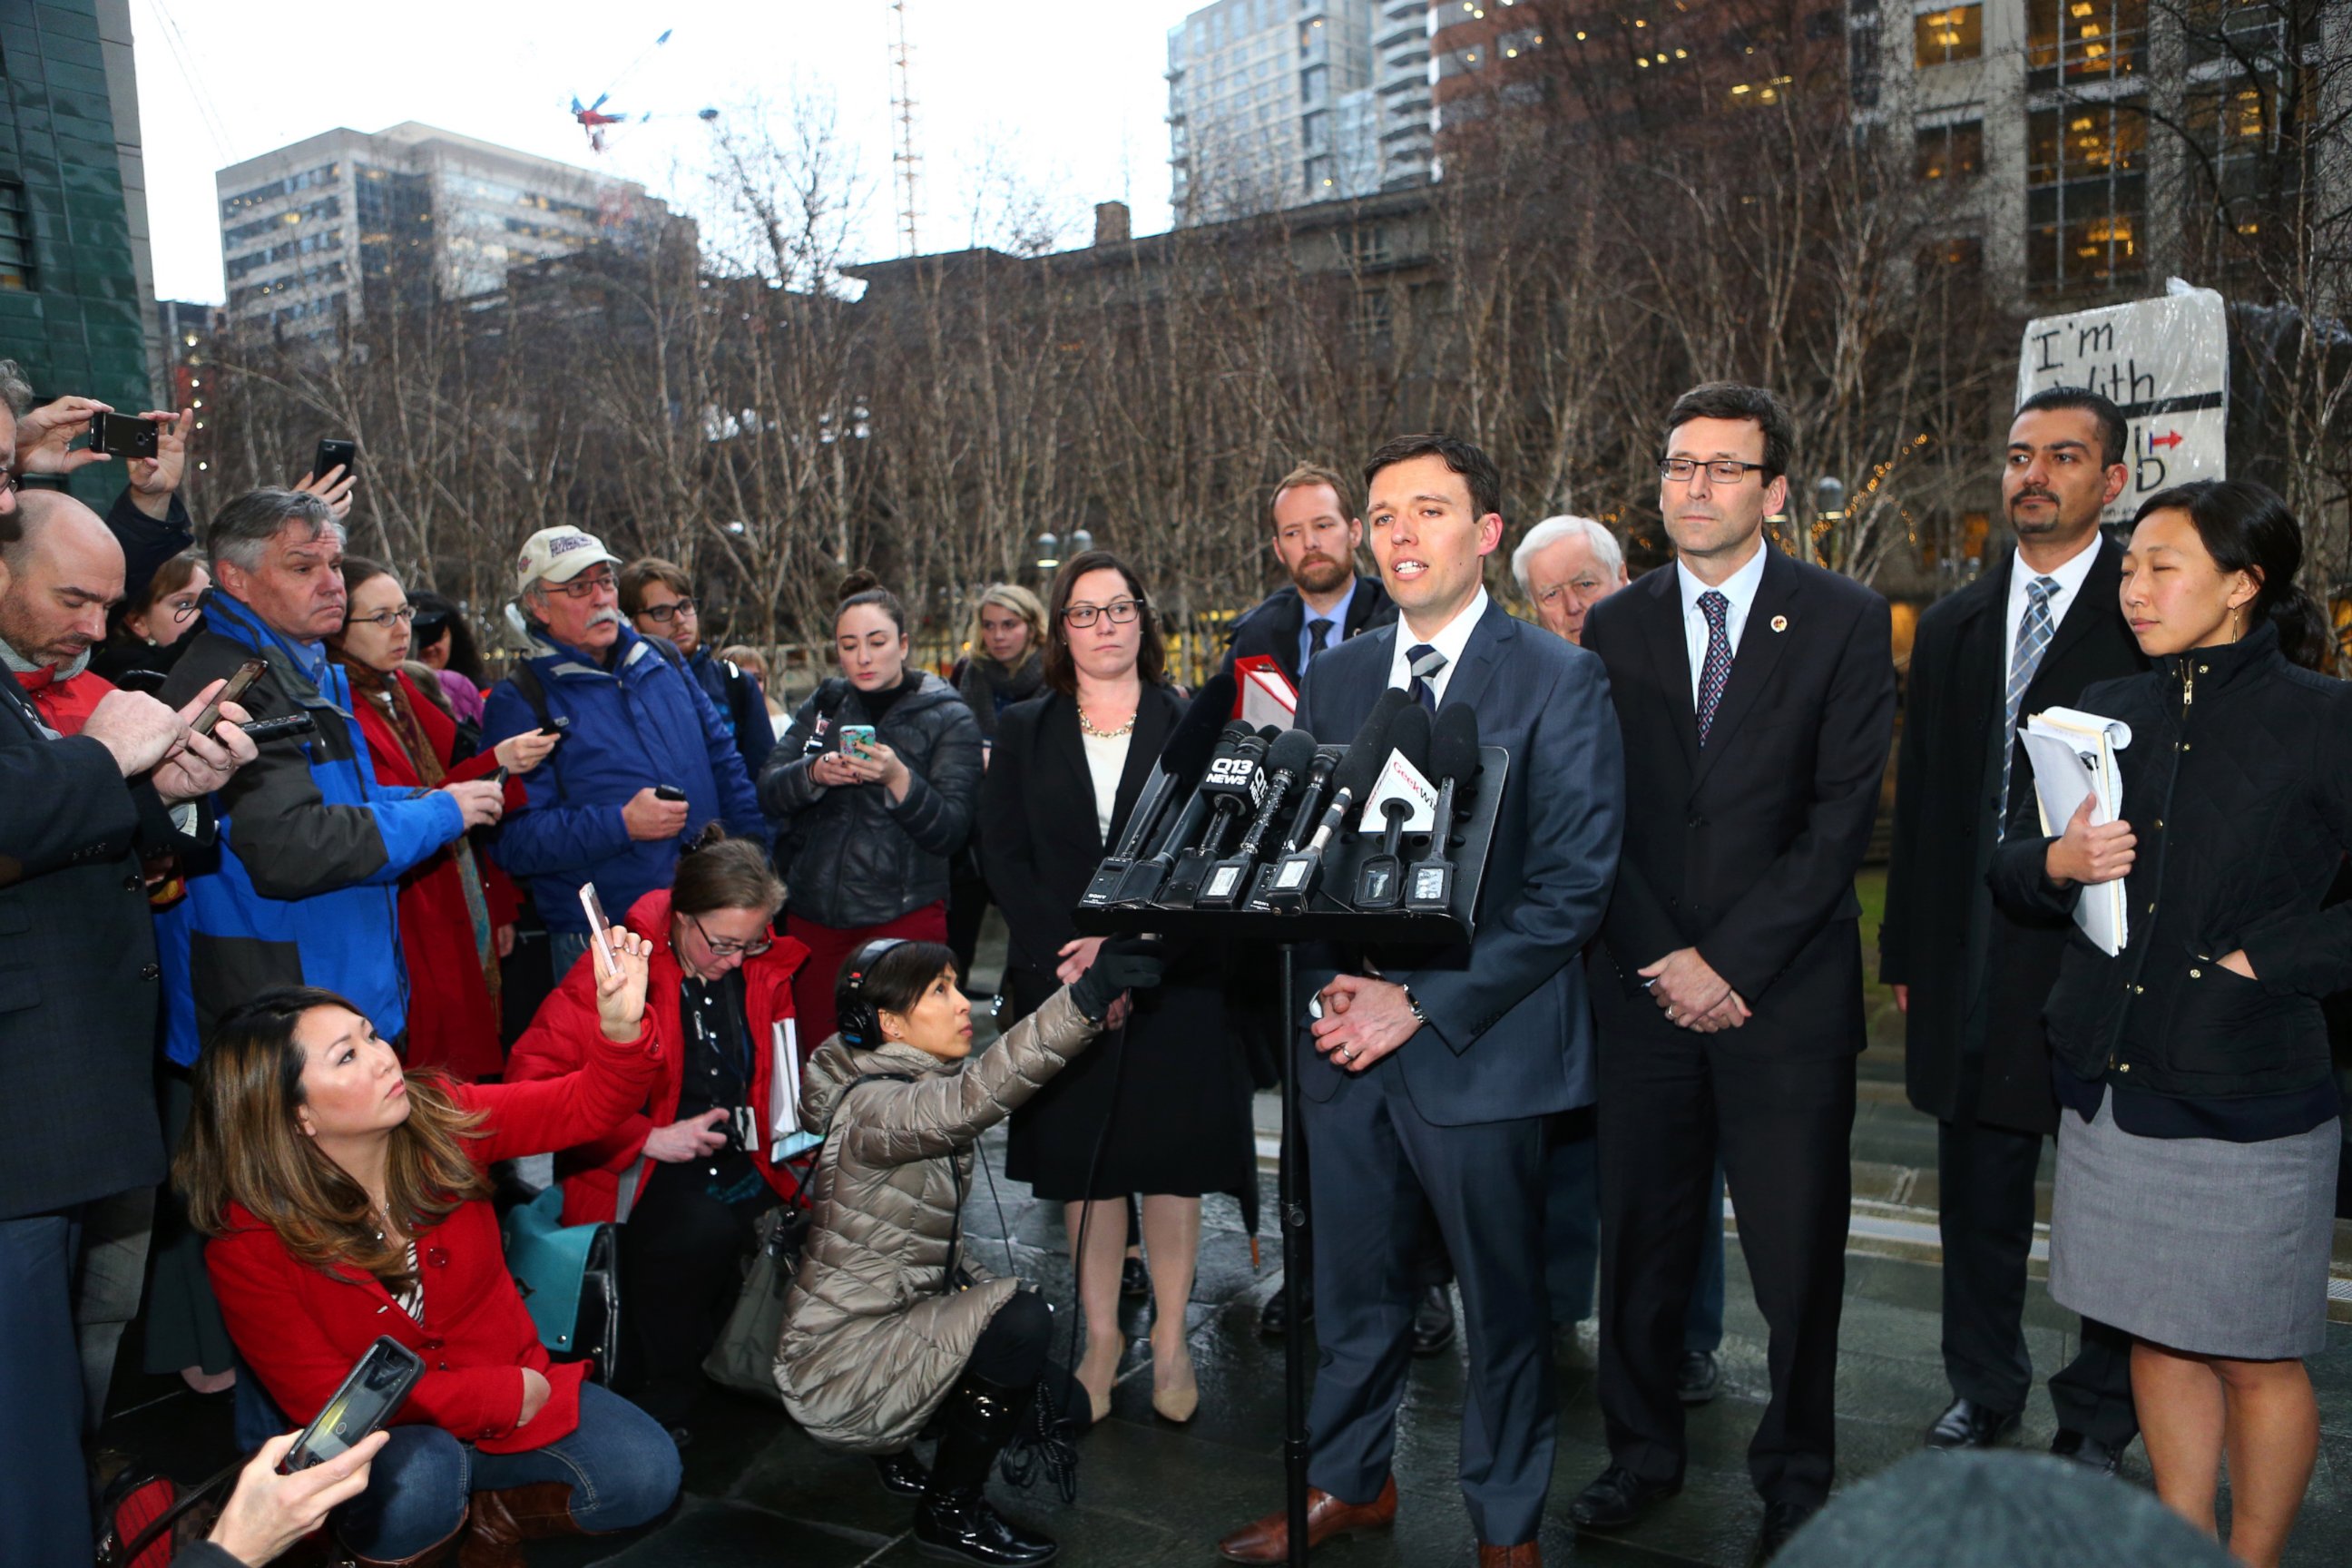 PHOTO: Solicitor General Noah Purcell speaks to the press with Washington state Attorney General Bob Ferguson (R) at a press conference outside U.S. District Court, Western Washington, on Feb. 3, 2017 in Seattle, Washington.